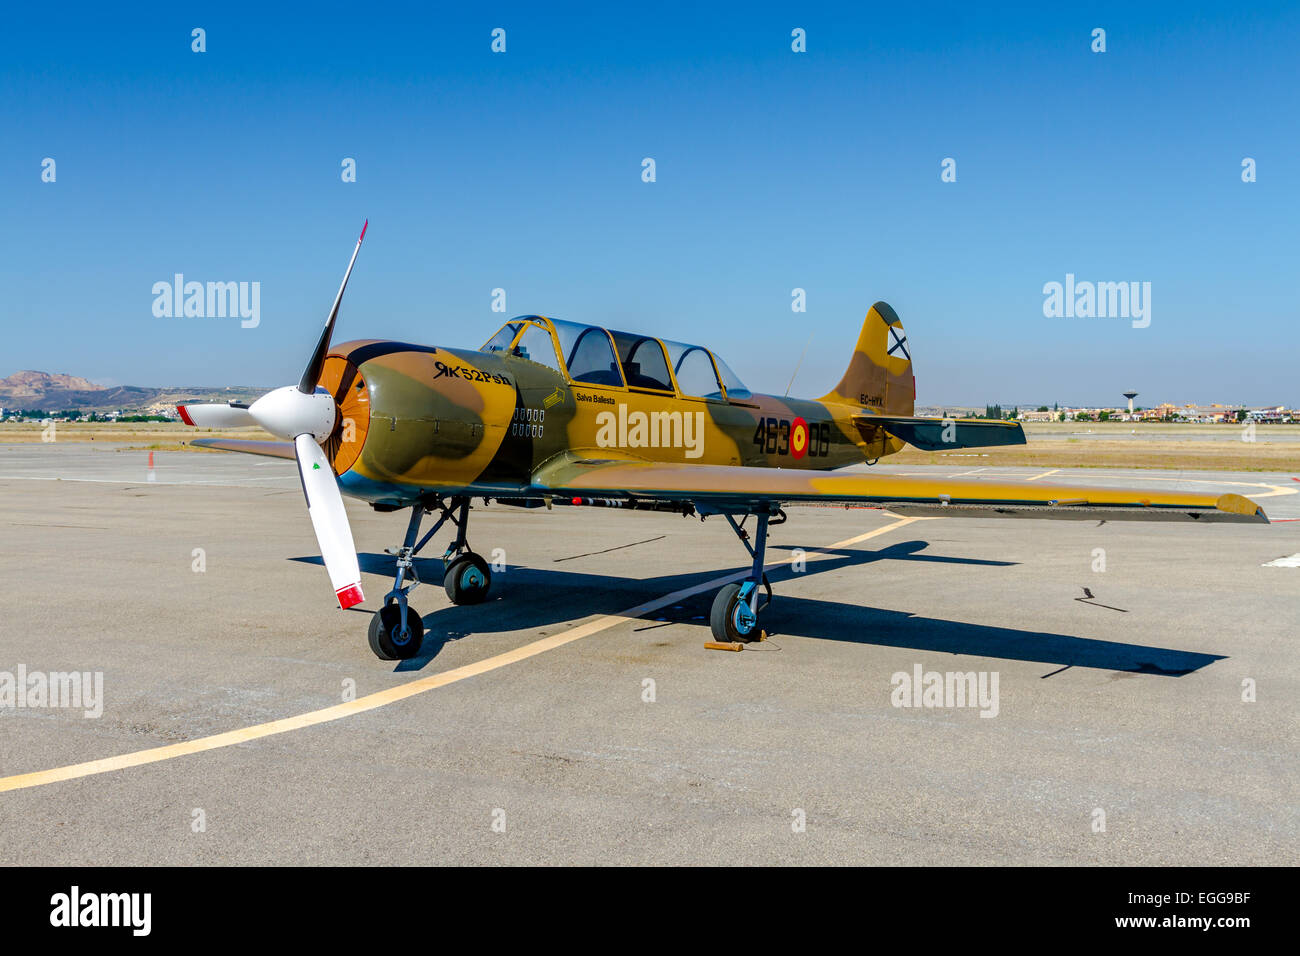 GRANADA, SPAIN-MAY 18: Airplane Yakovlev Yak-52 taking part in a exhibition on the X aniversary of the Patrulla Aspa of the airbase of Armilla on May 18, 2014, in Granada, Spain Stock Photo